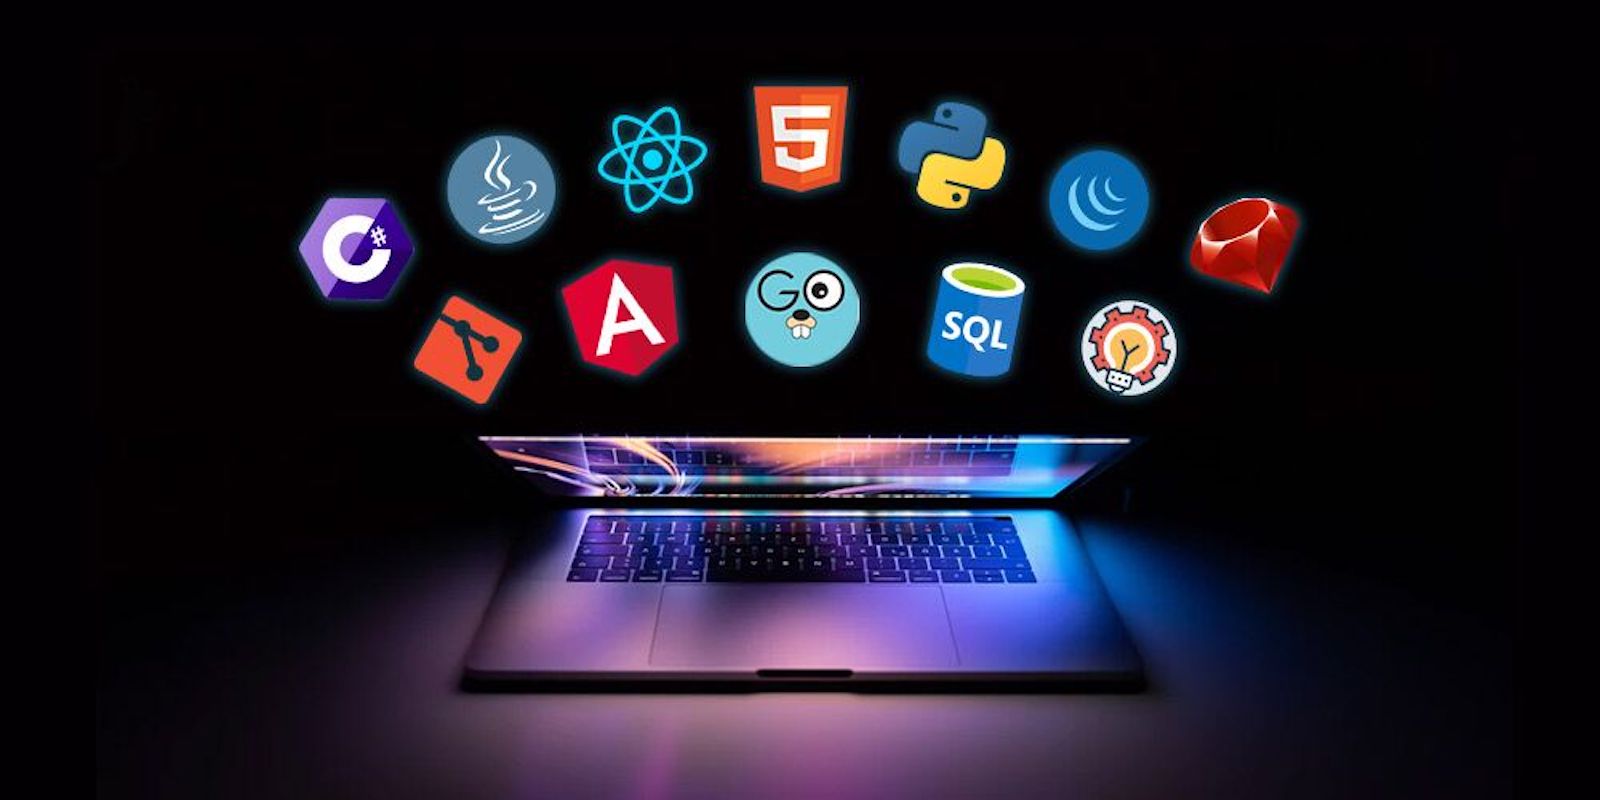 Name your price for over a dozen comprehensive courses covering all areas of coding.